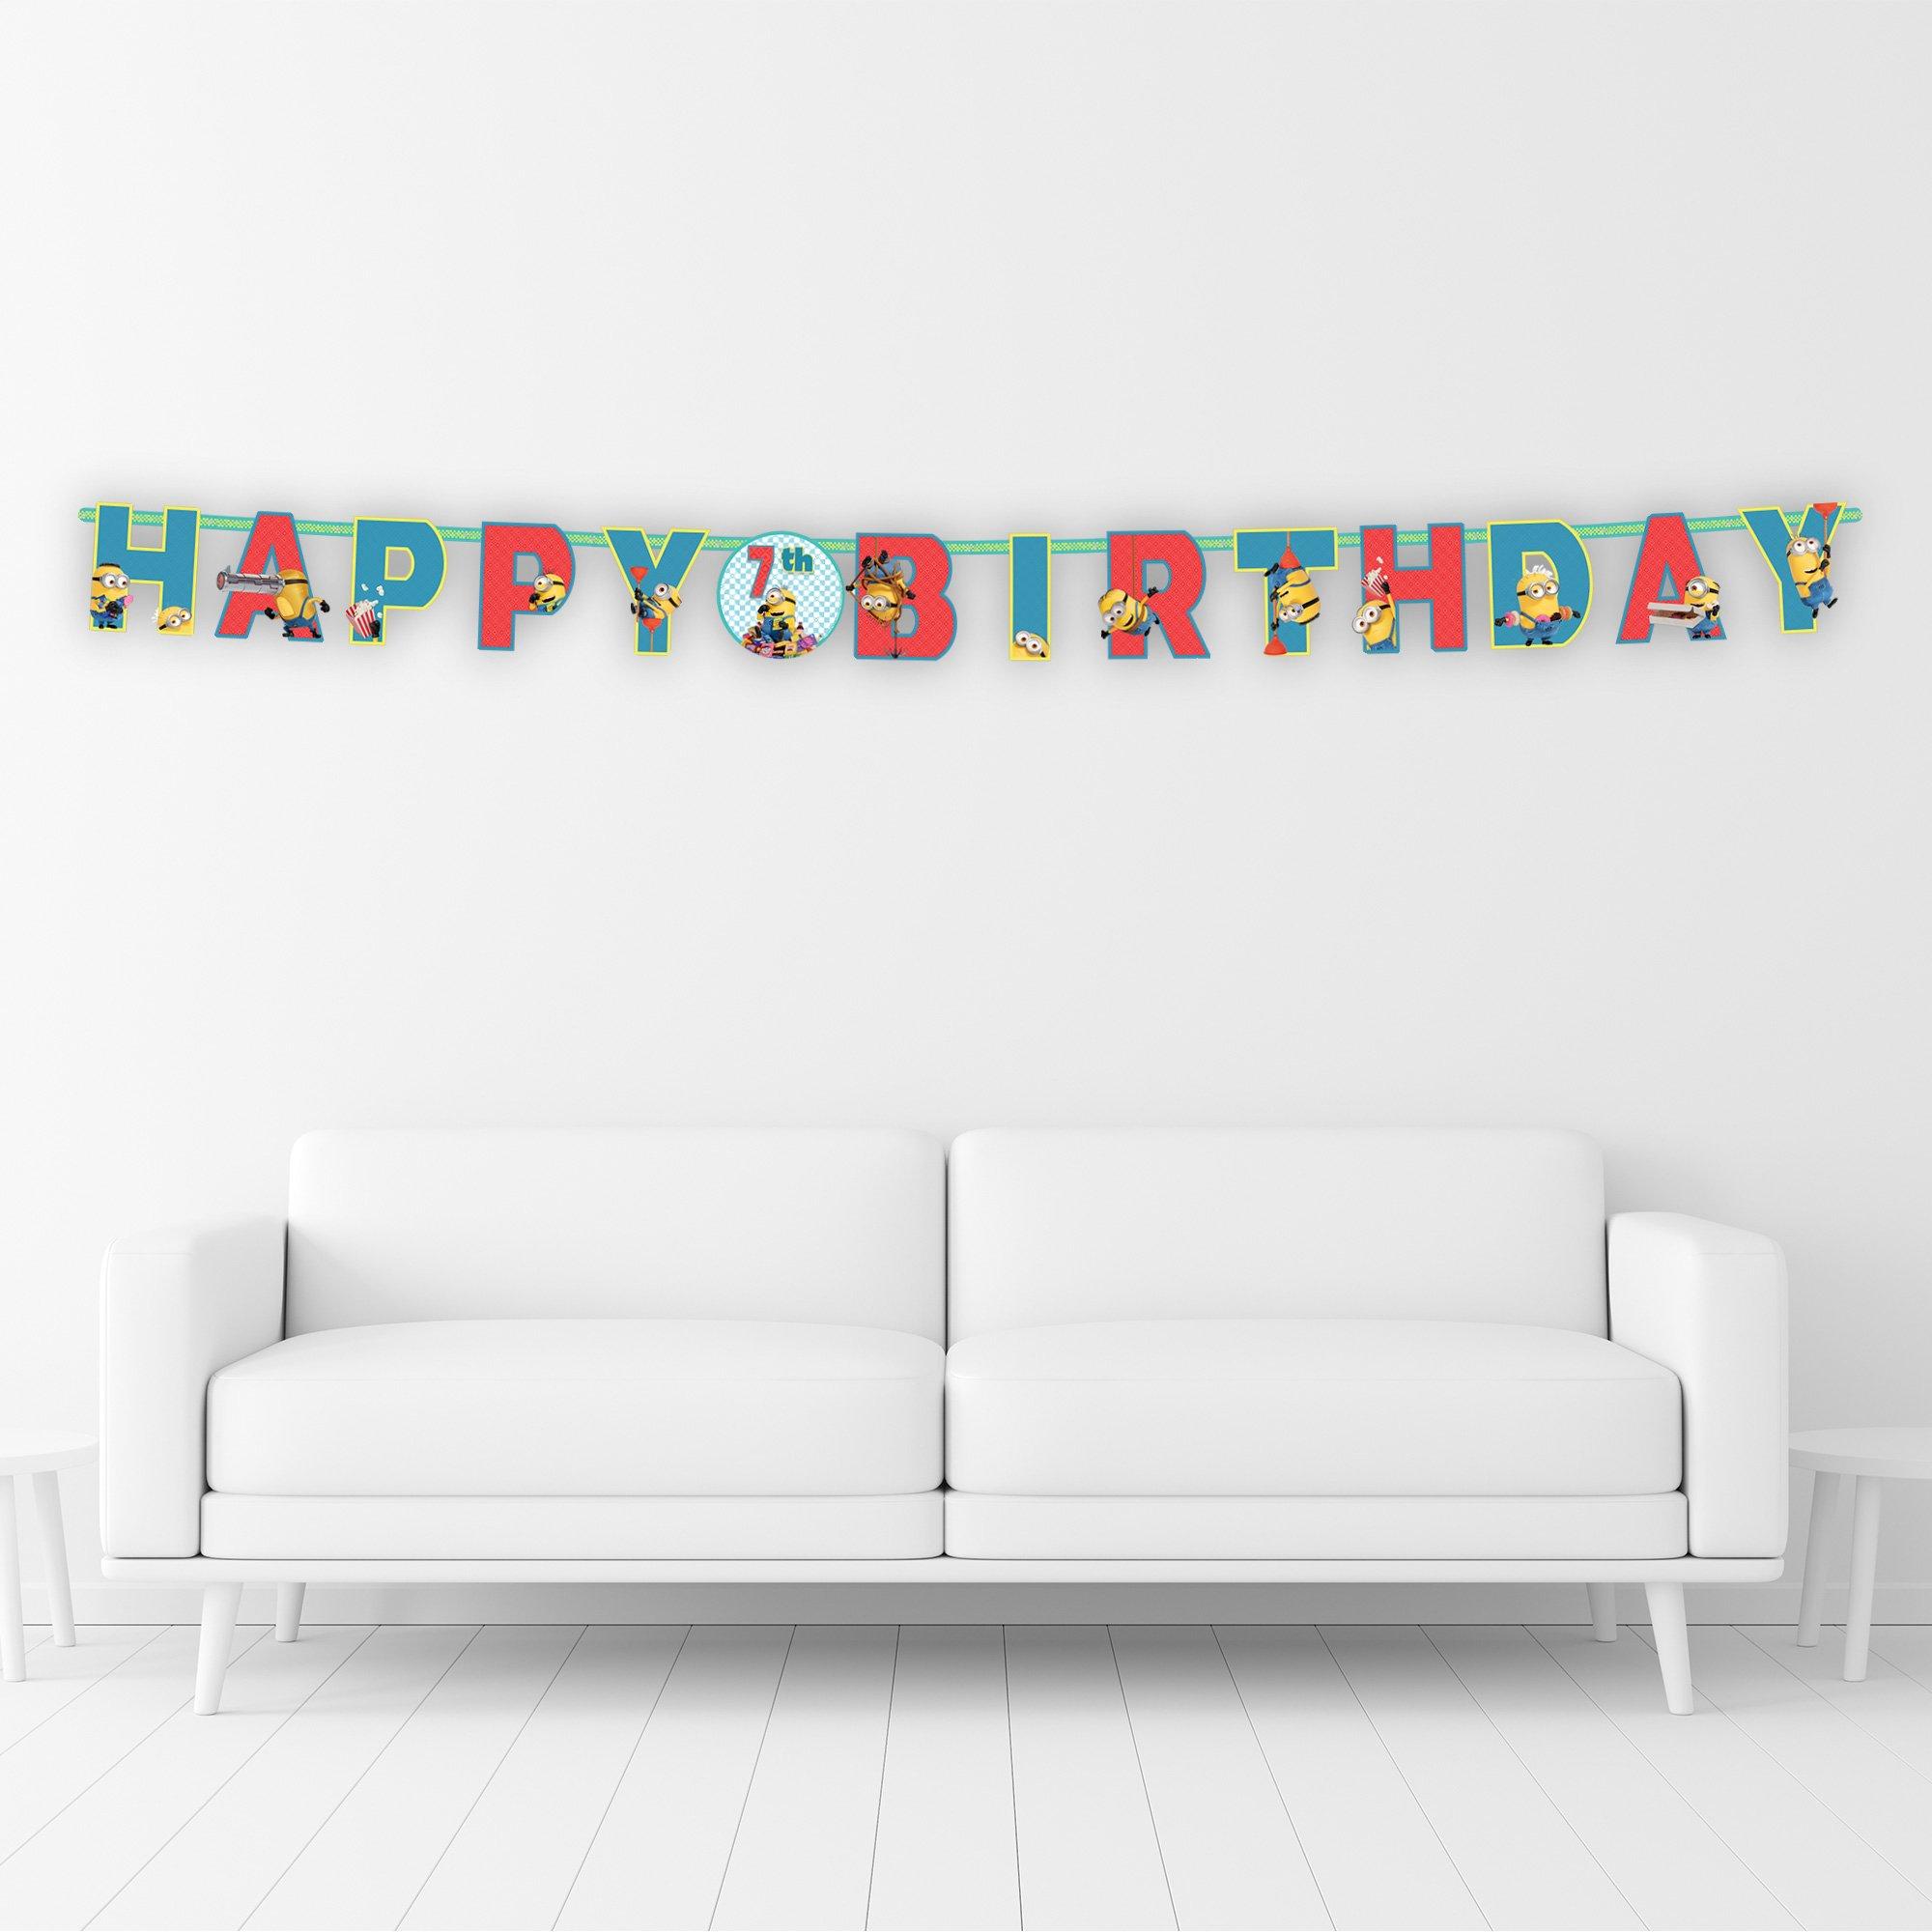 Minions Add an Age Cardstock Birthday Banner Kit, 10ft - Despicable Me 4